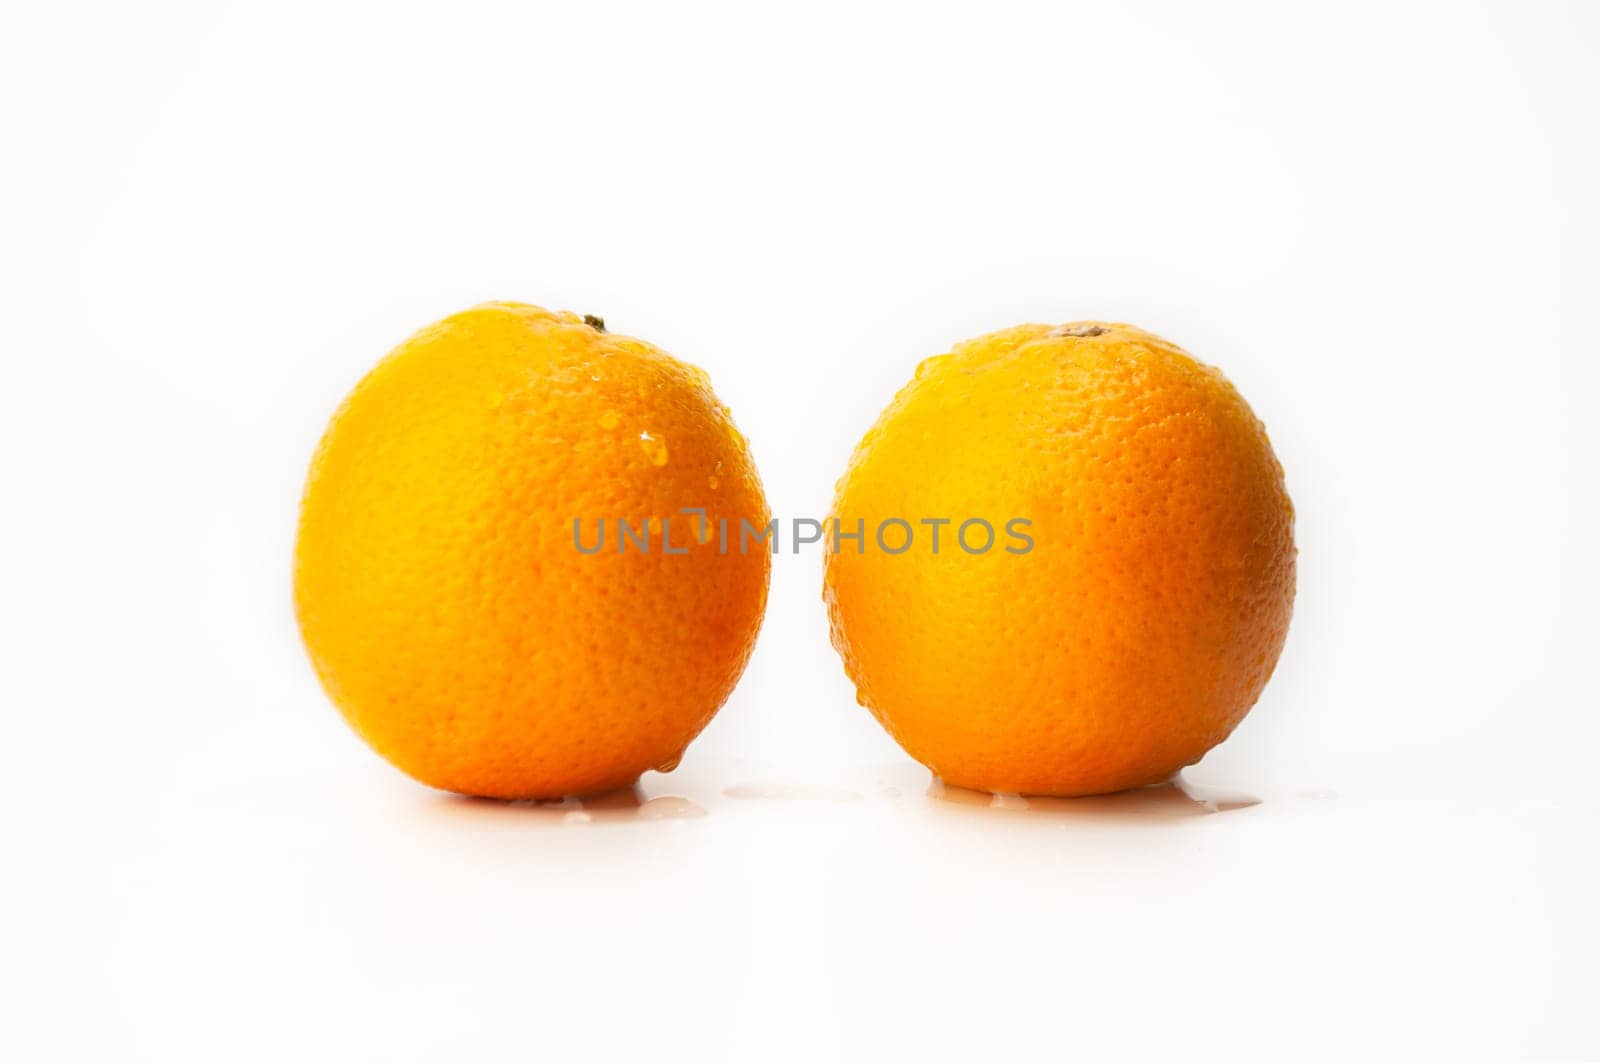 Two oranges are sitting on a white background. The oranges are wet and shiny. Concept of freshness and vitality